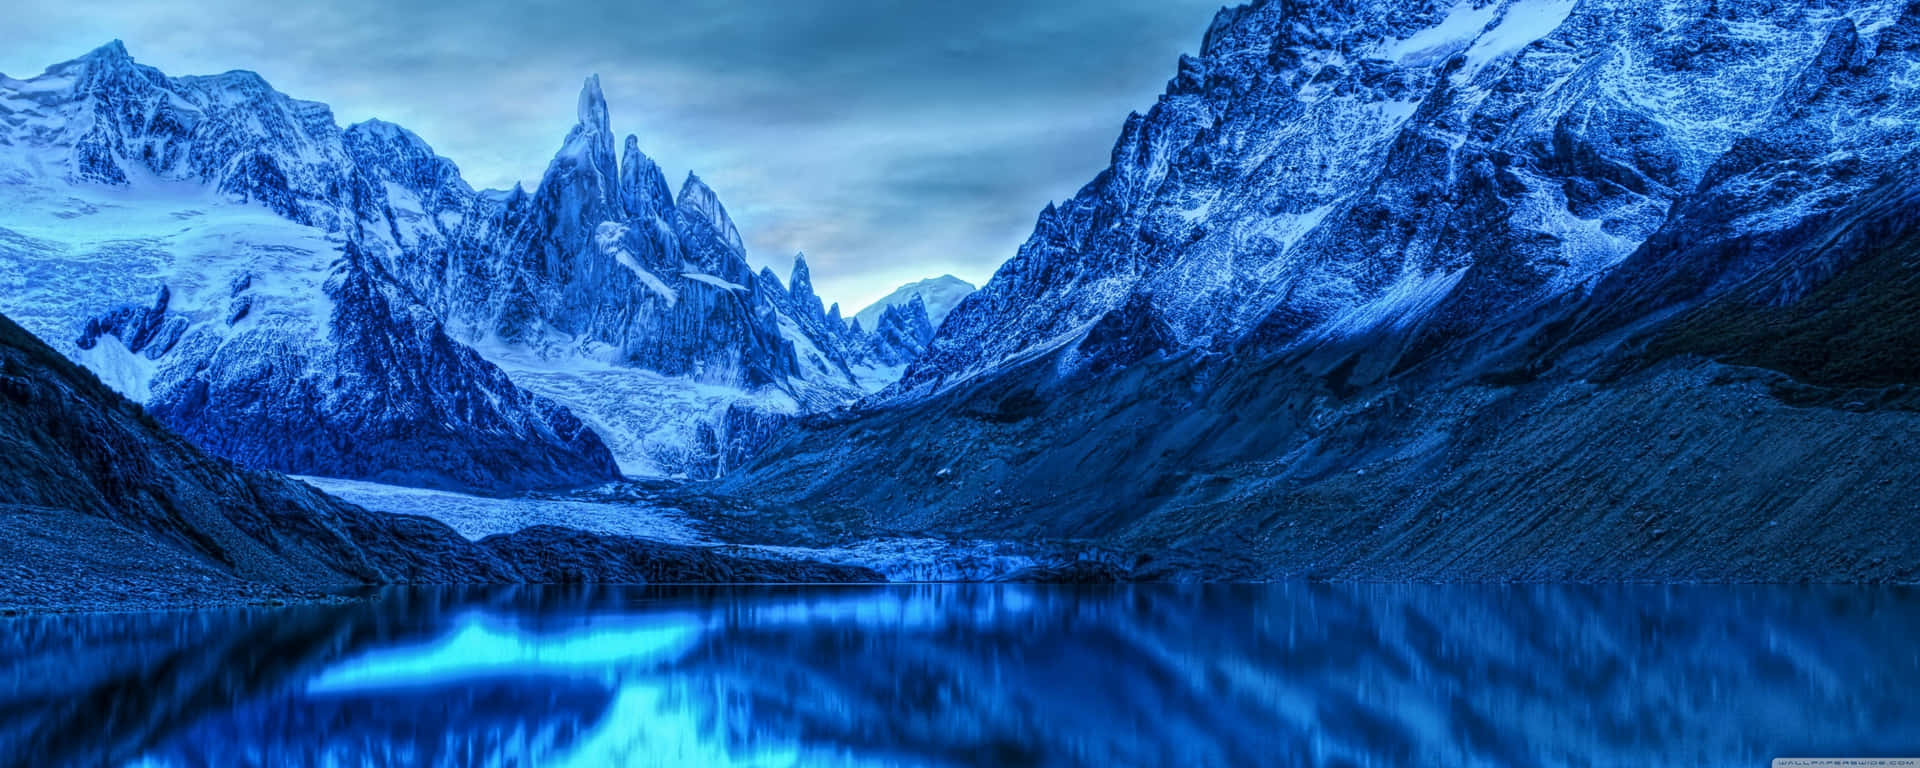 A Blue Mountain Range With A Lake In The Background Wallpaper